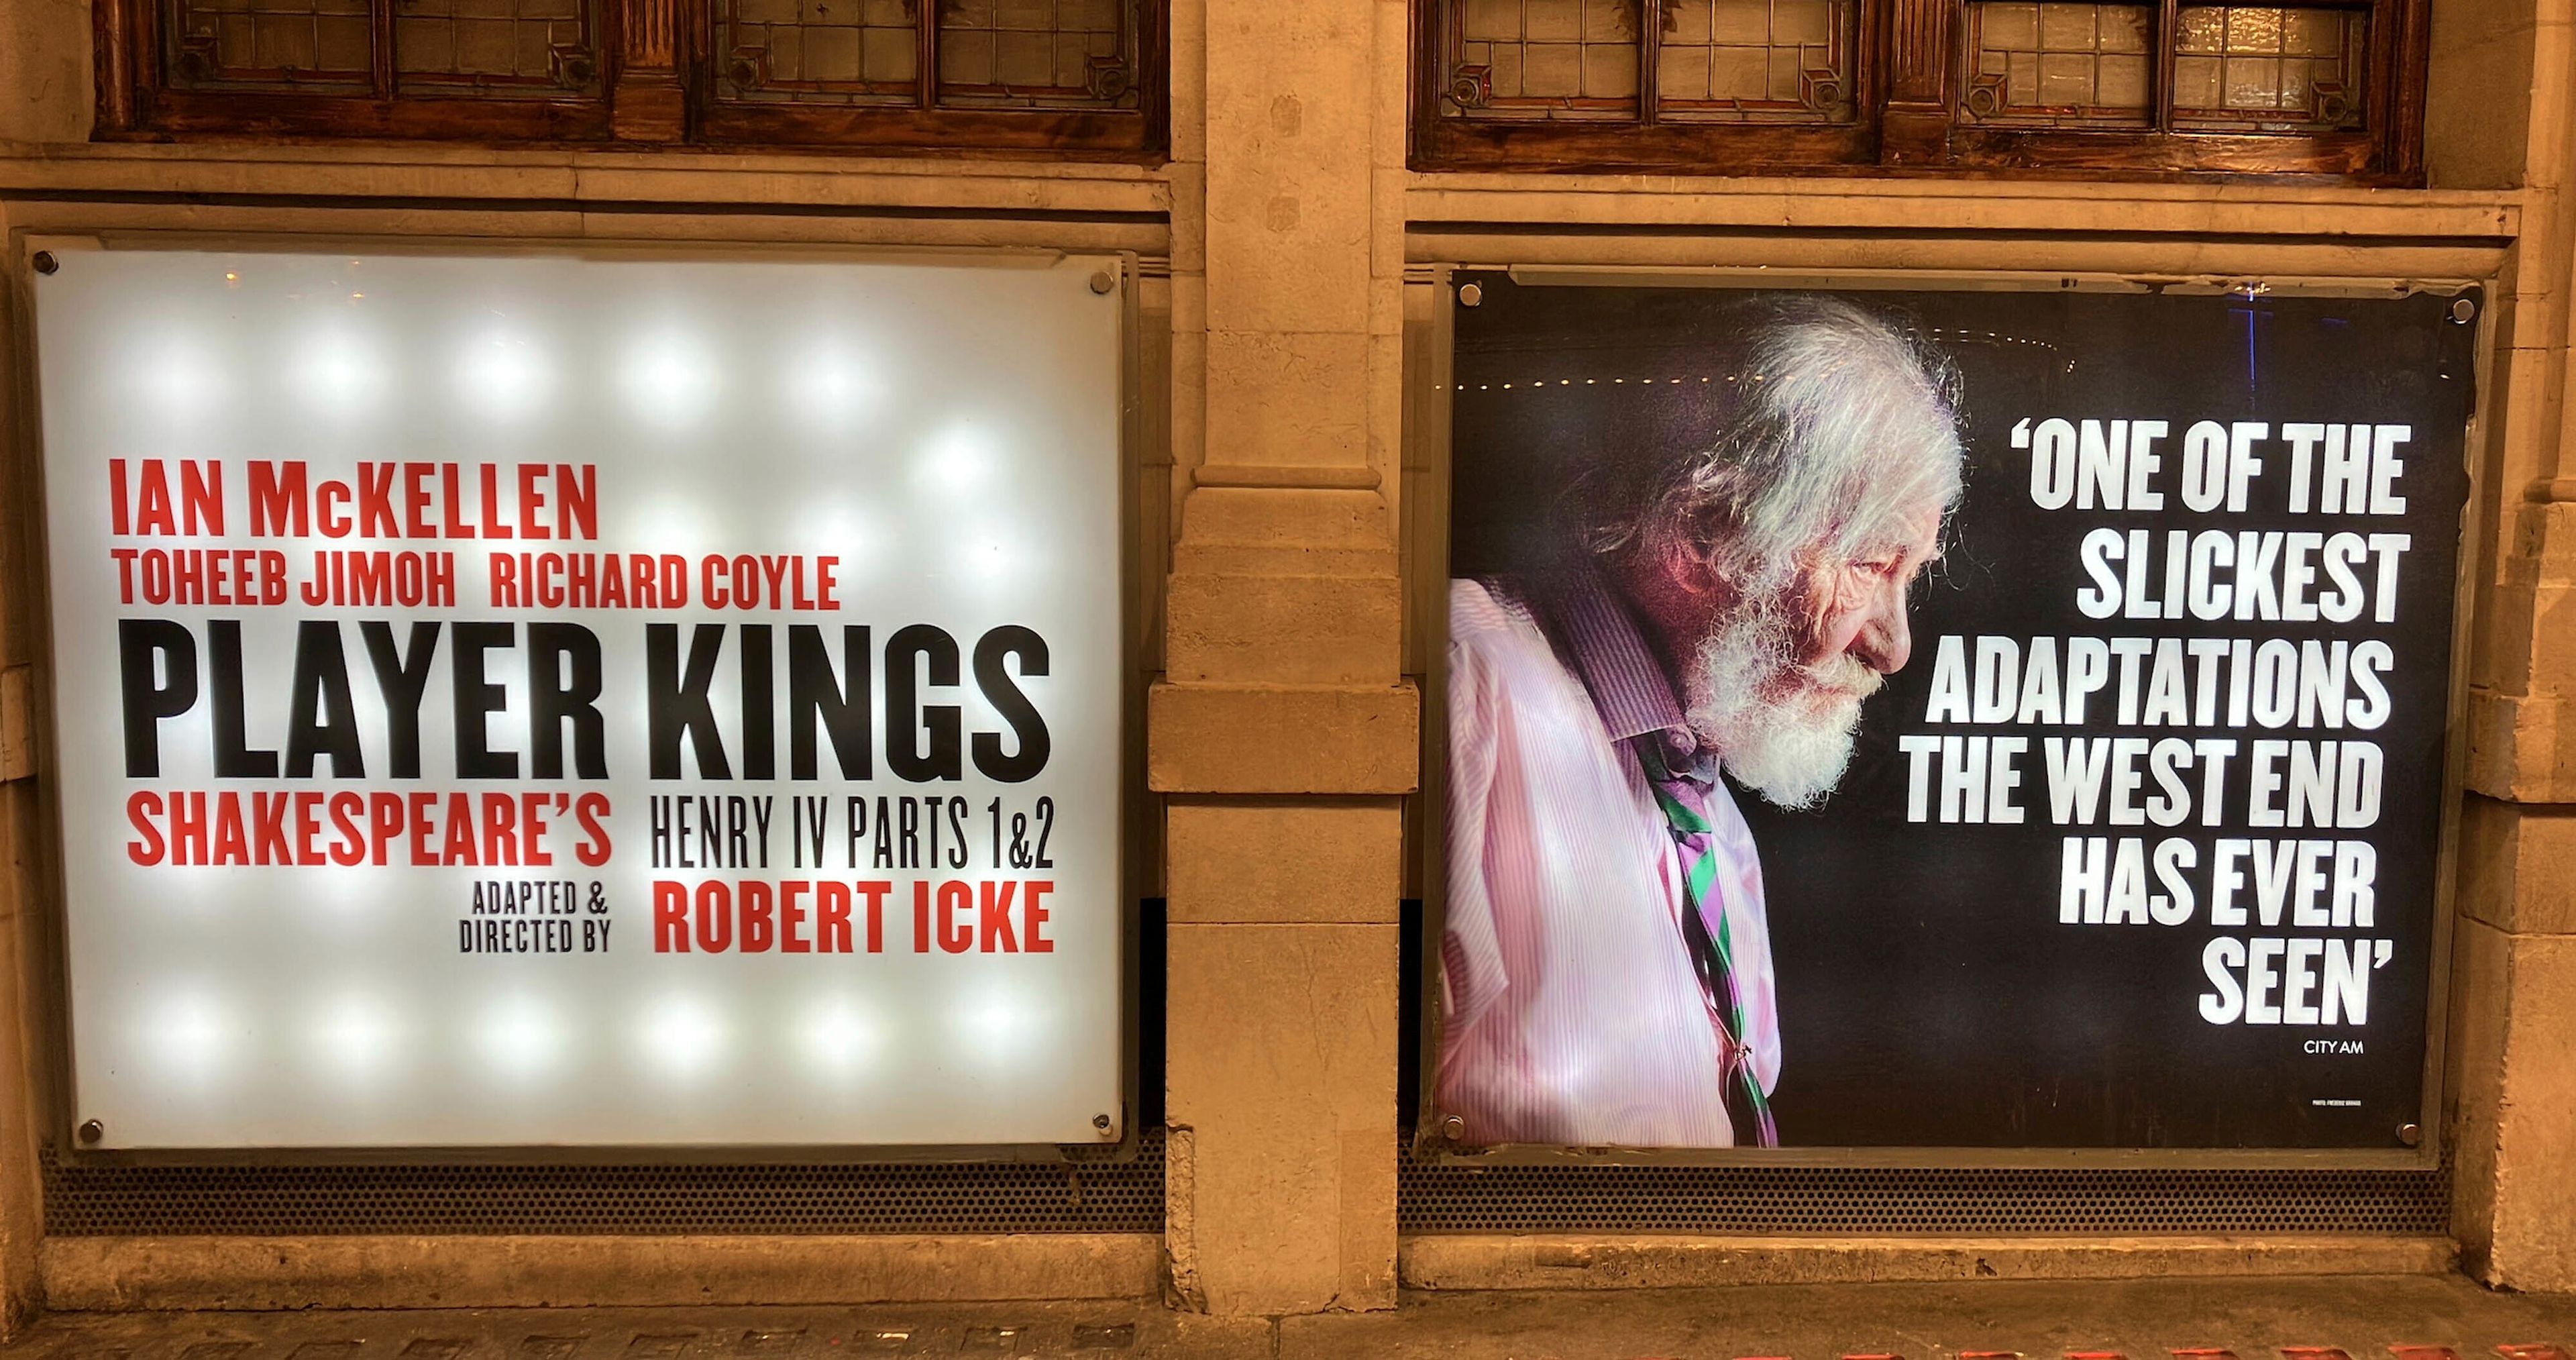 A sign for Player Kings at the Noel Coward Theatre in London, starring Sir Ian McKellen, who has been taken to hospital after he fell from the stage during a West End performance, Monday, June 17, 2024. The 85-year-old actor known for playing Gandalf in the “Lord of the Rings” films and his many stage roles was playing John Falstaff in a production of Player Kings at the theater. (Jacob Freedland/PA via AP)